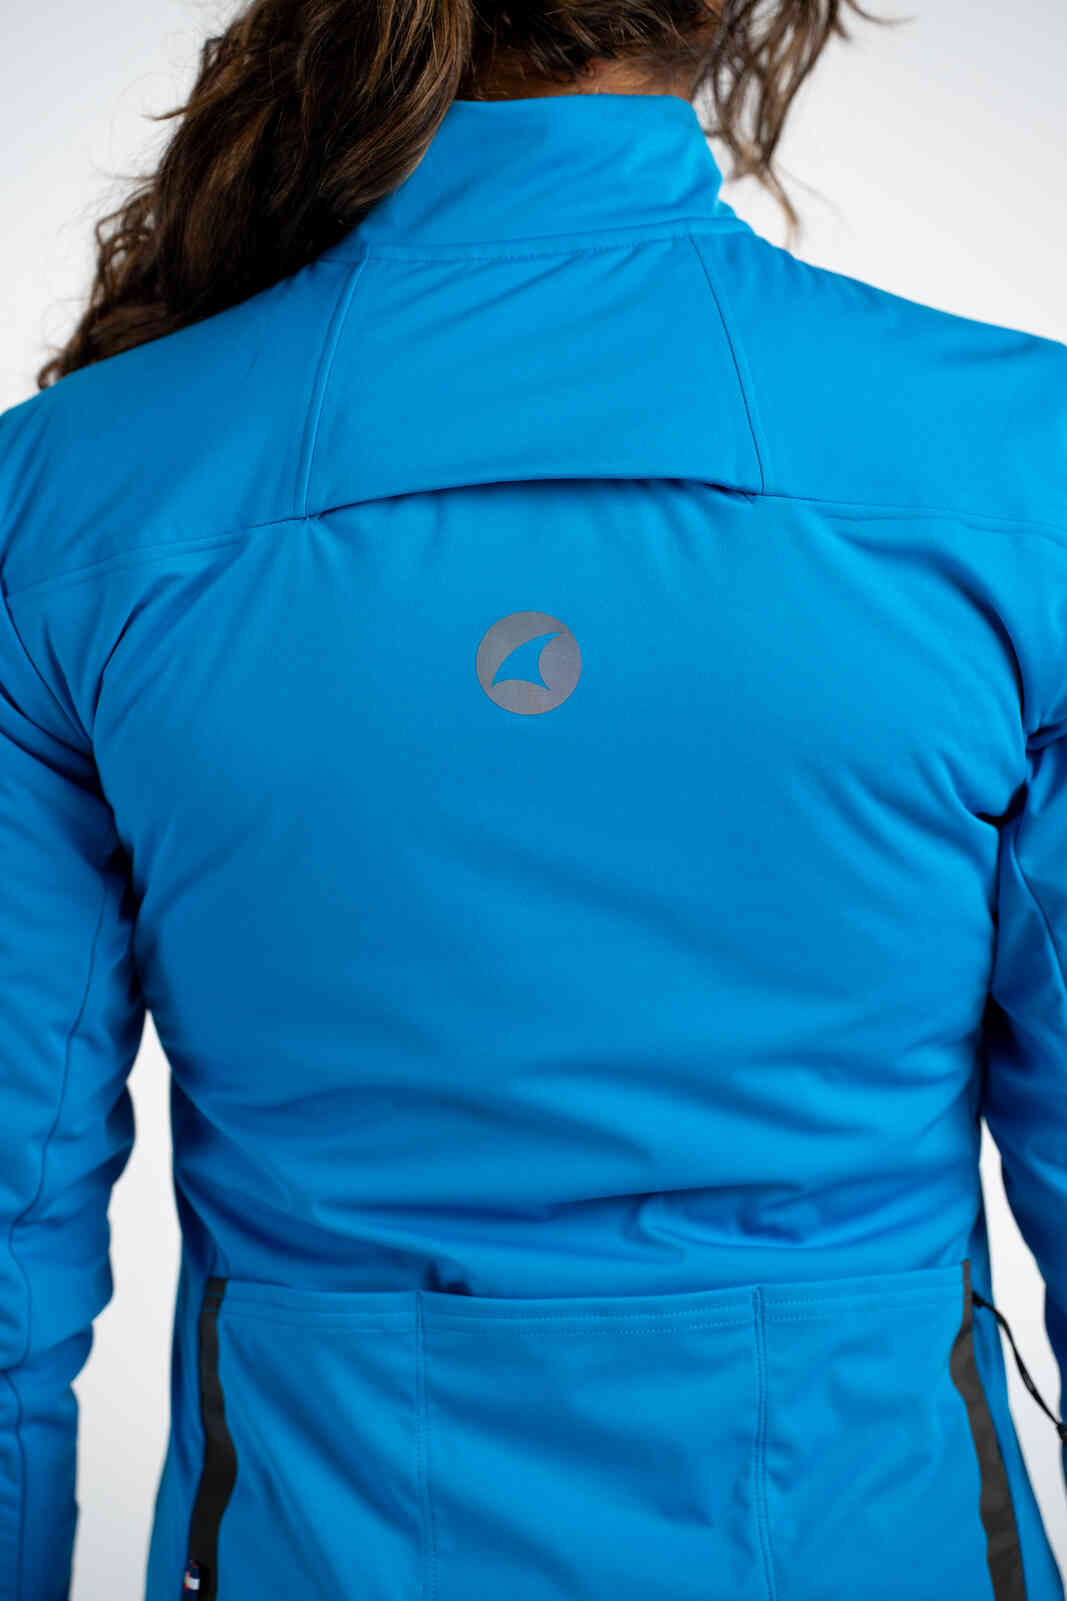 Women's Blue Winter Cycling Jacket - Back Venting